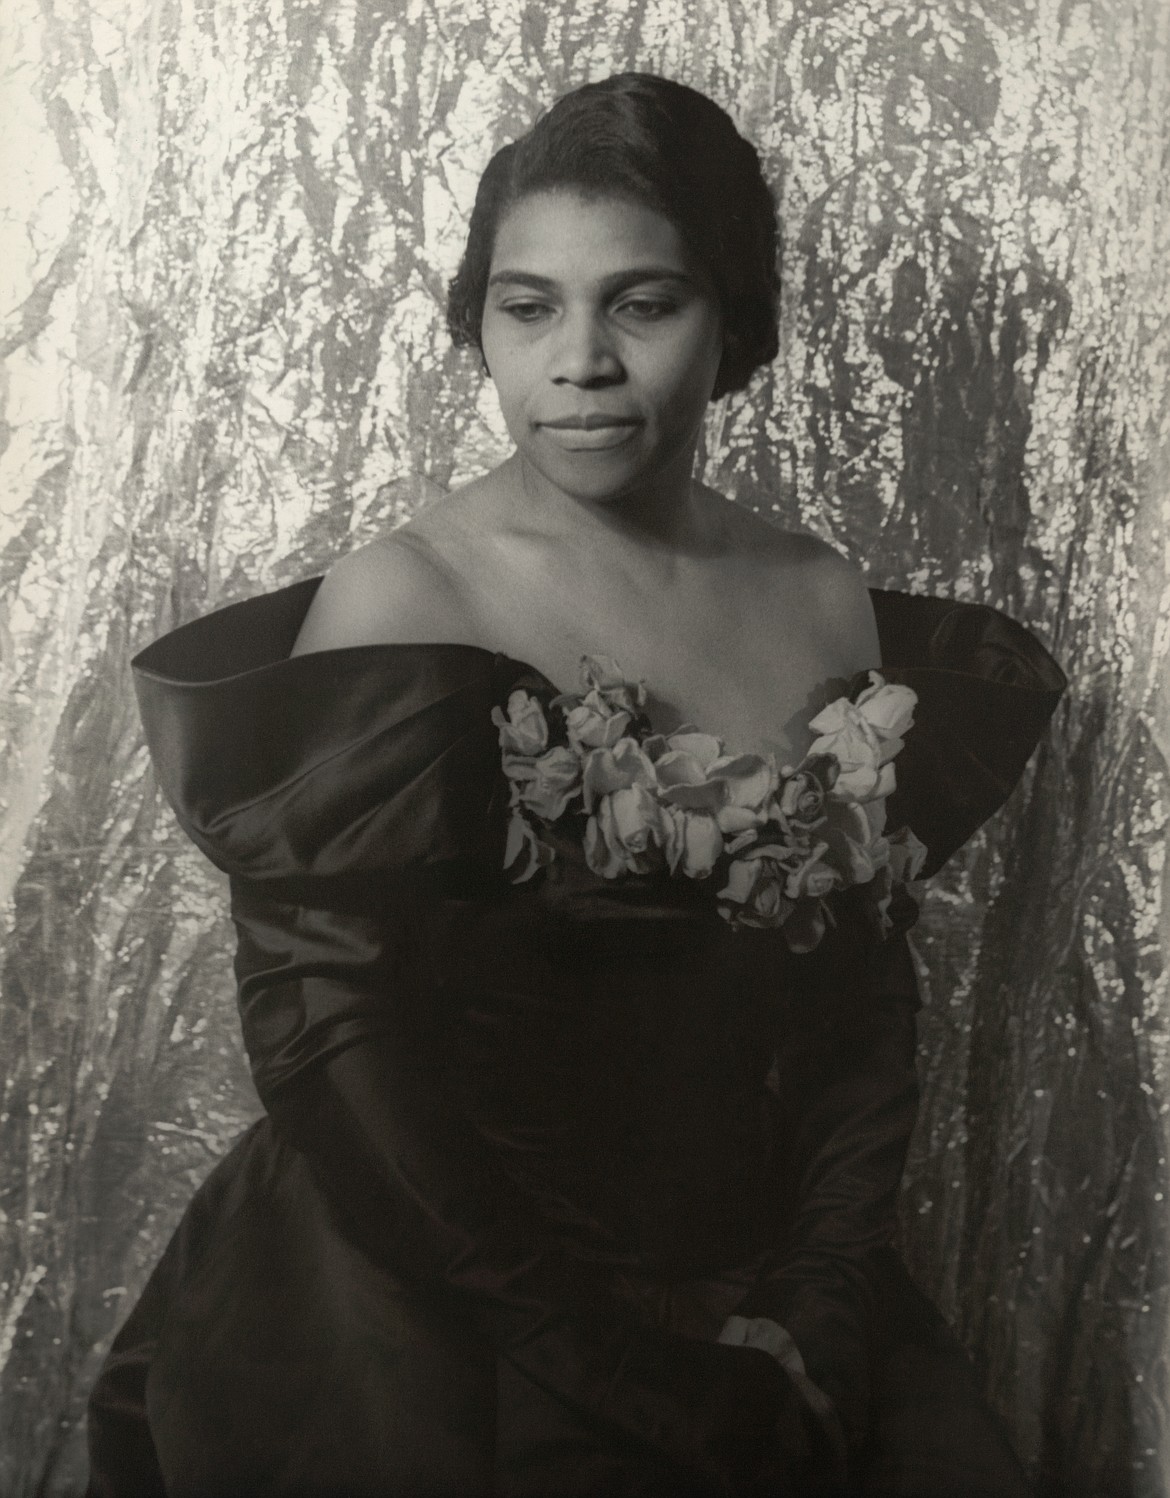 Marian Anderson, who used her acclaimed voice to promote racial equality, is one of the women featured in a movie series to be shown at the Moses Lake Museum & Art Center this month.